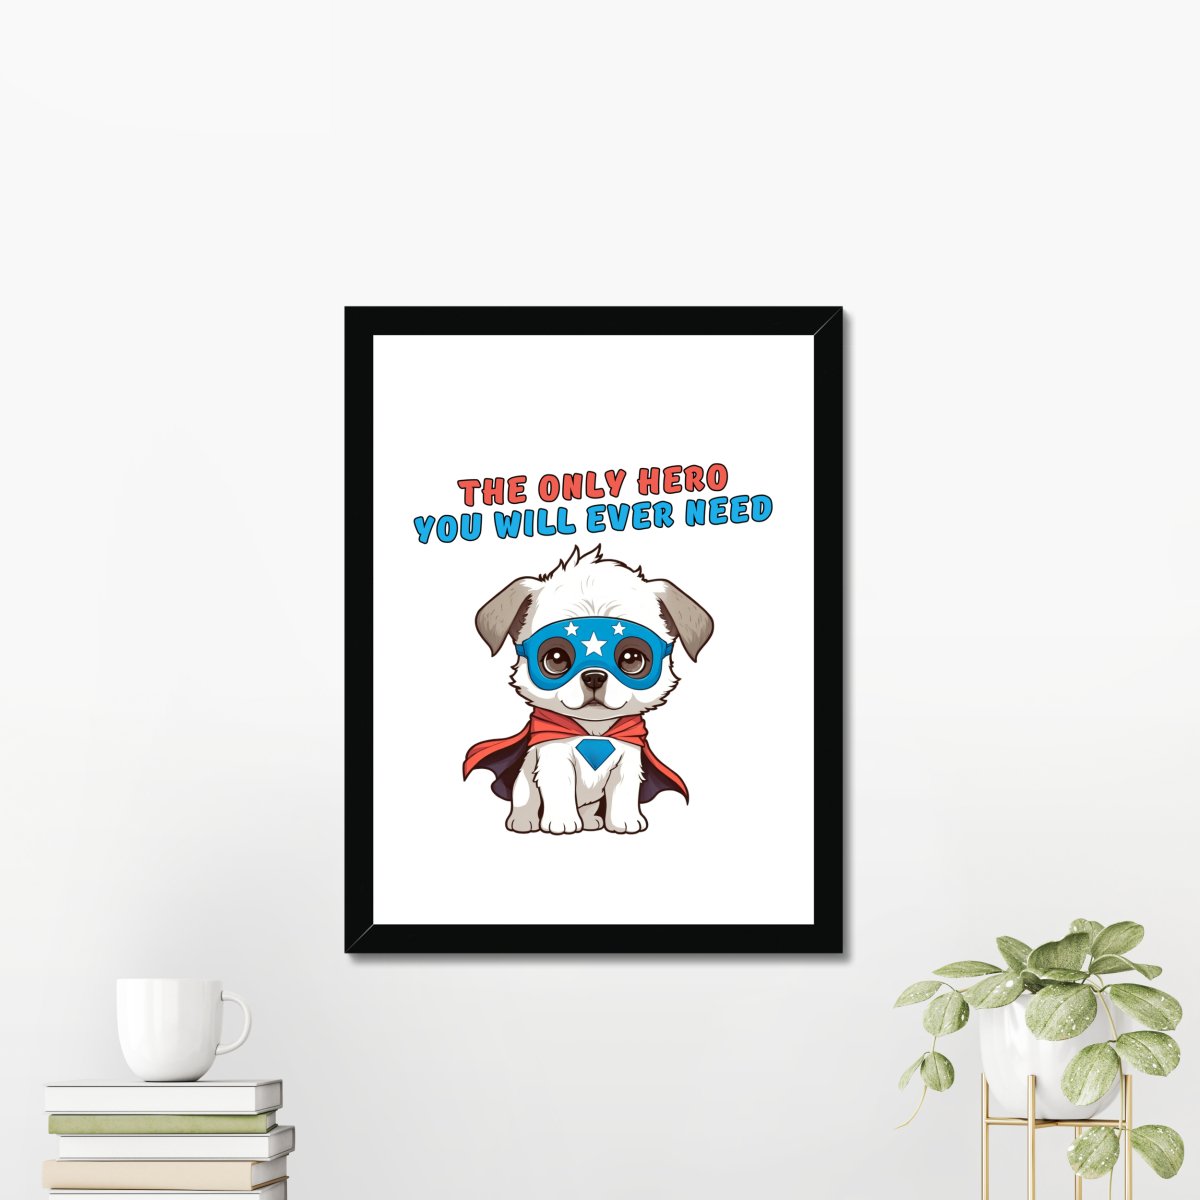 The only hero - Art print - Poster - Ever colorful